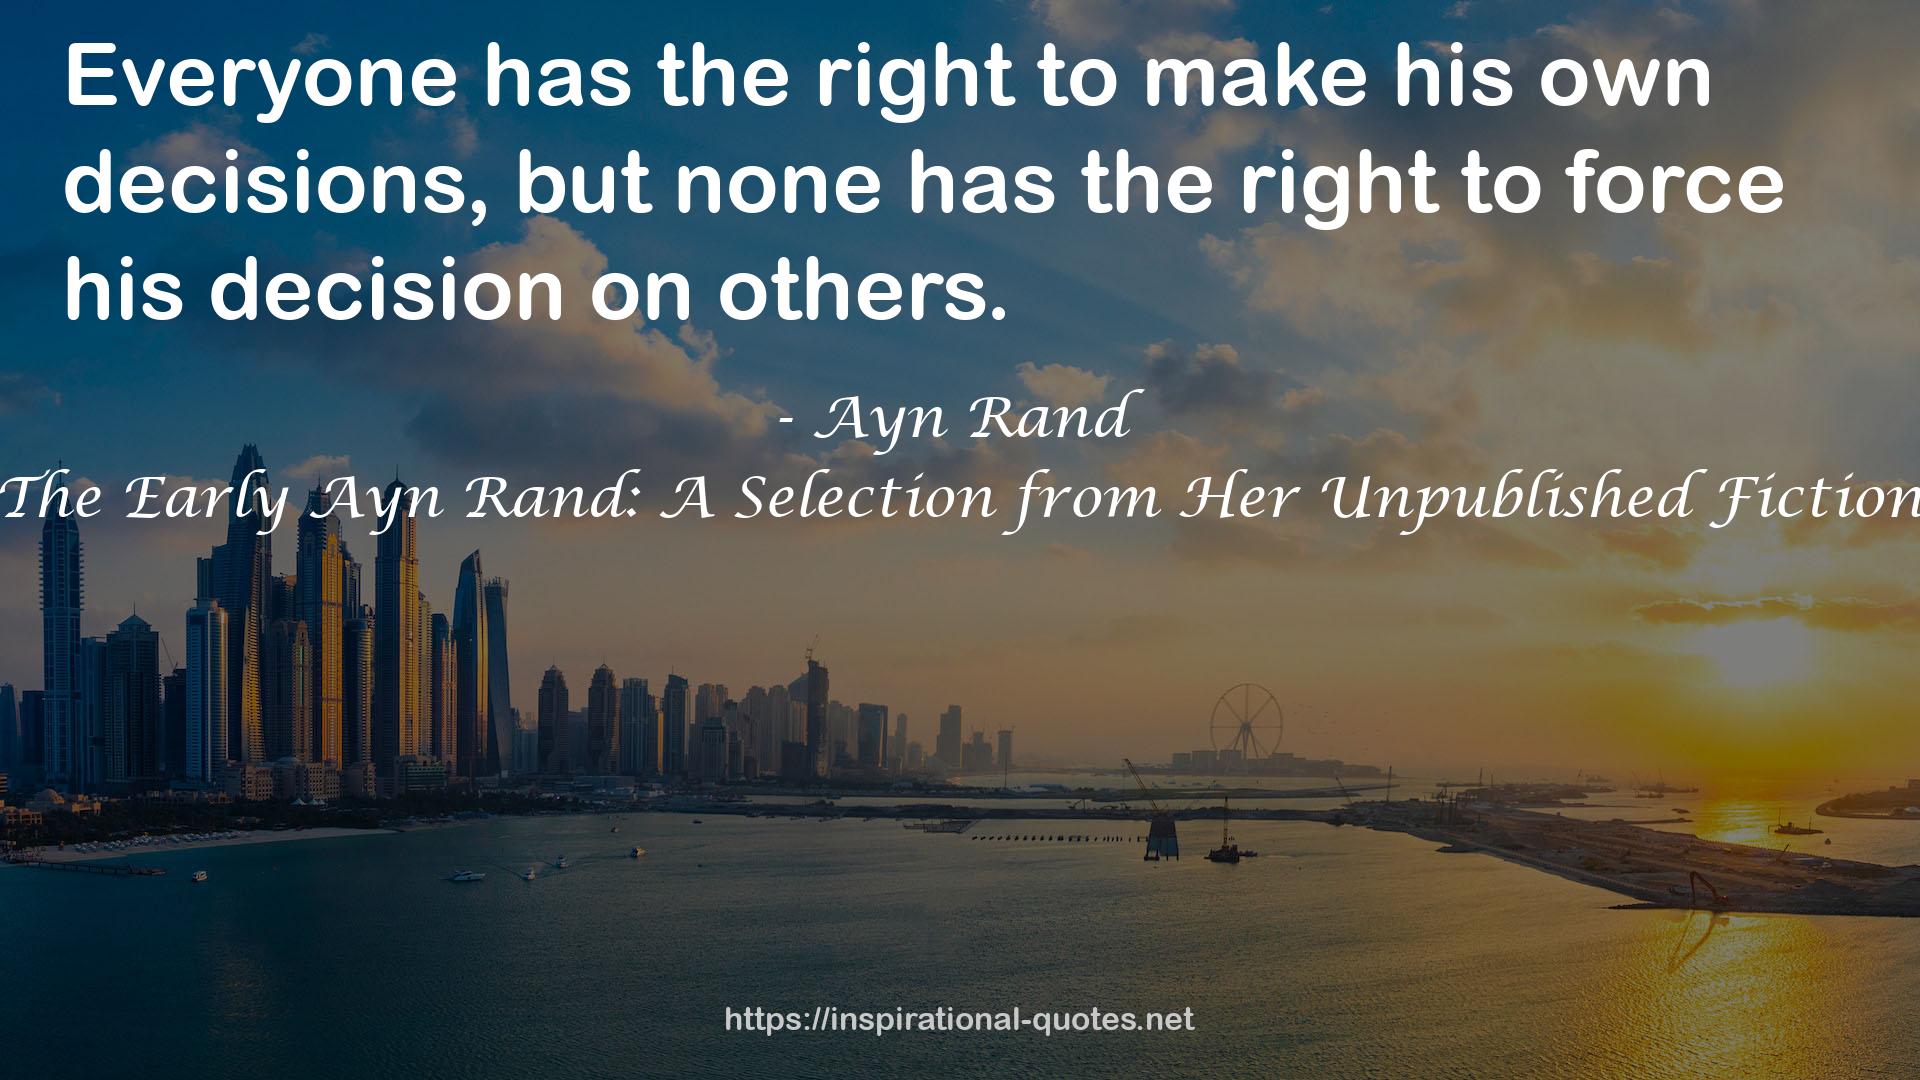 The Early Ayn Rand: A Selection from Her Unpublished Fiction QUOTES